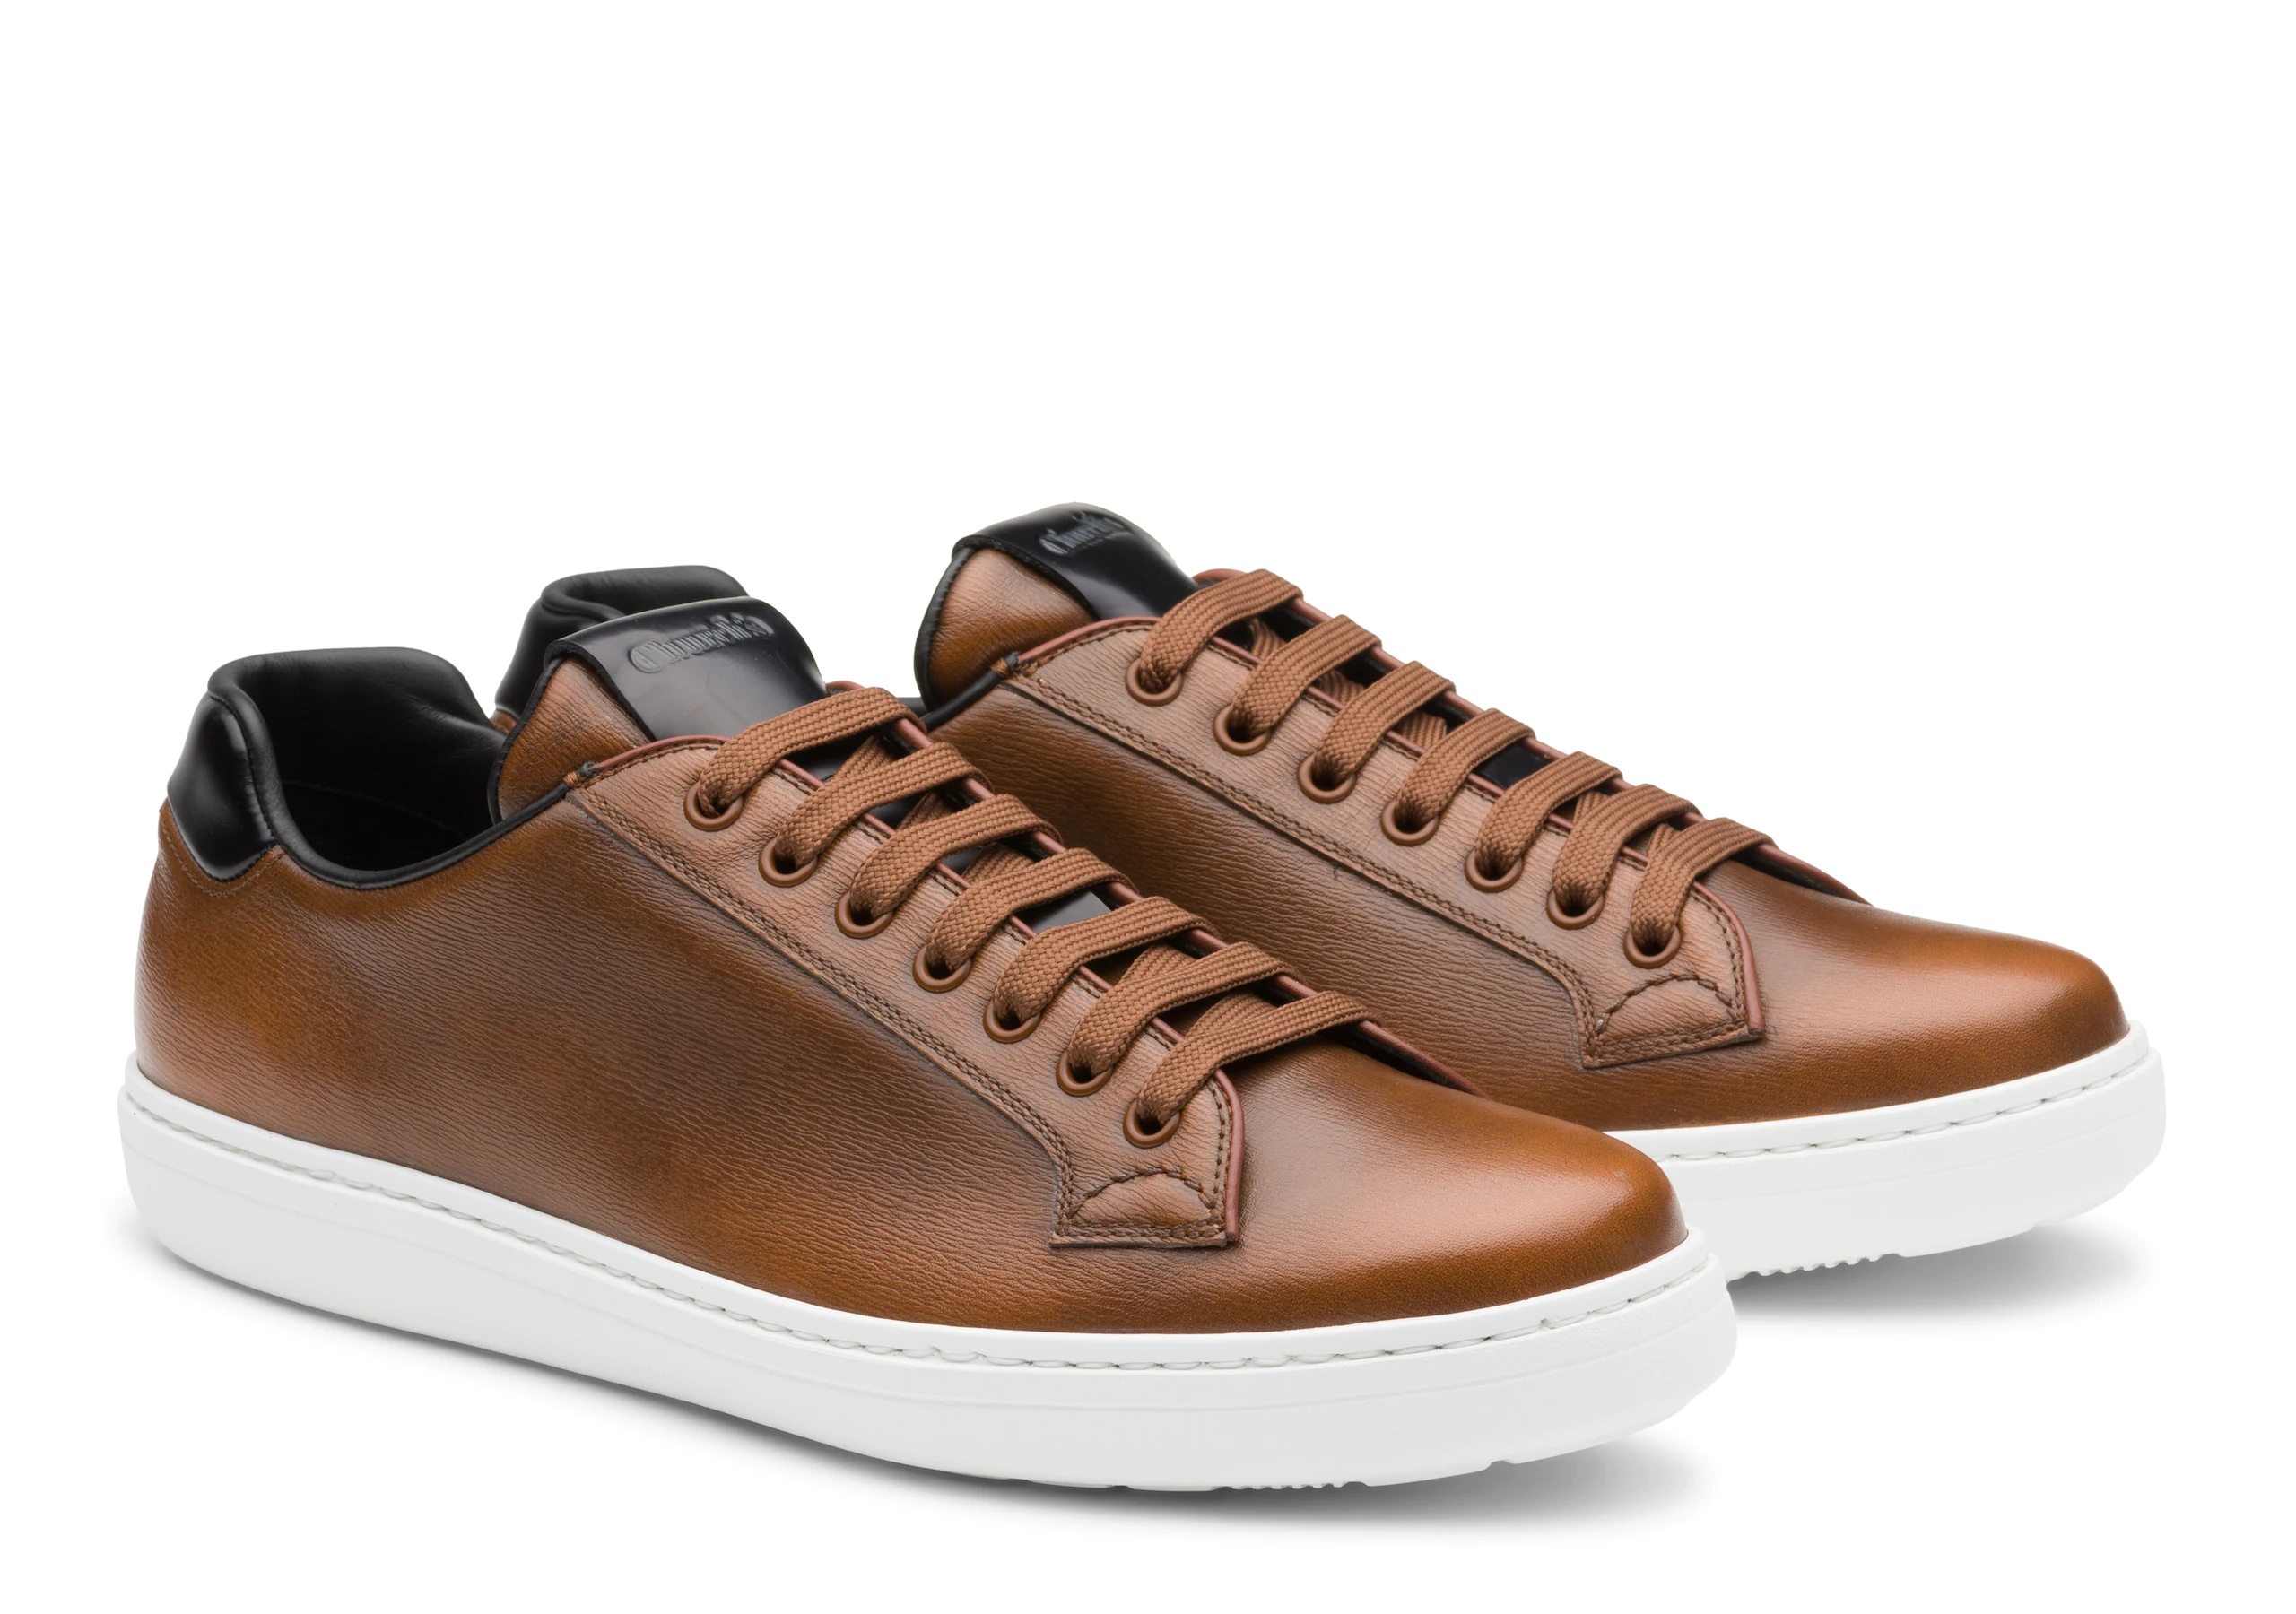 Boland plus 2
St James Leather Classic Sneaker Walnut - 2